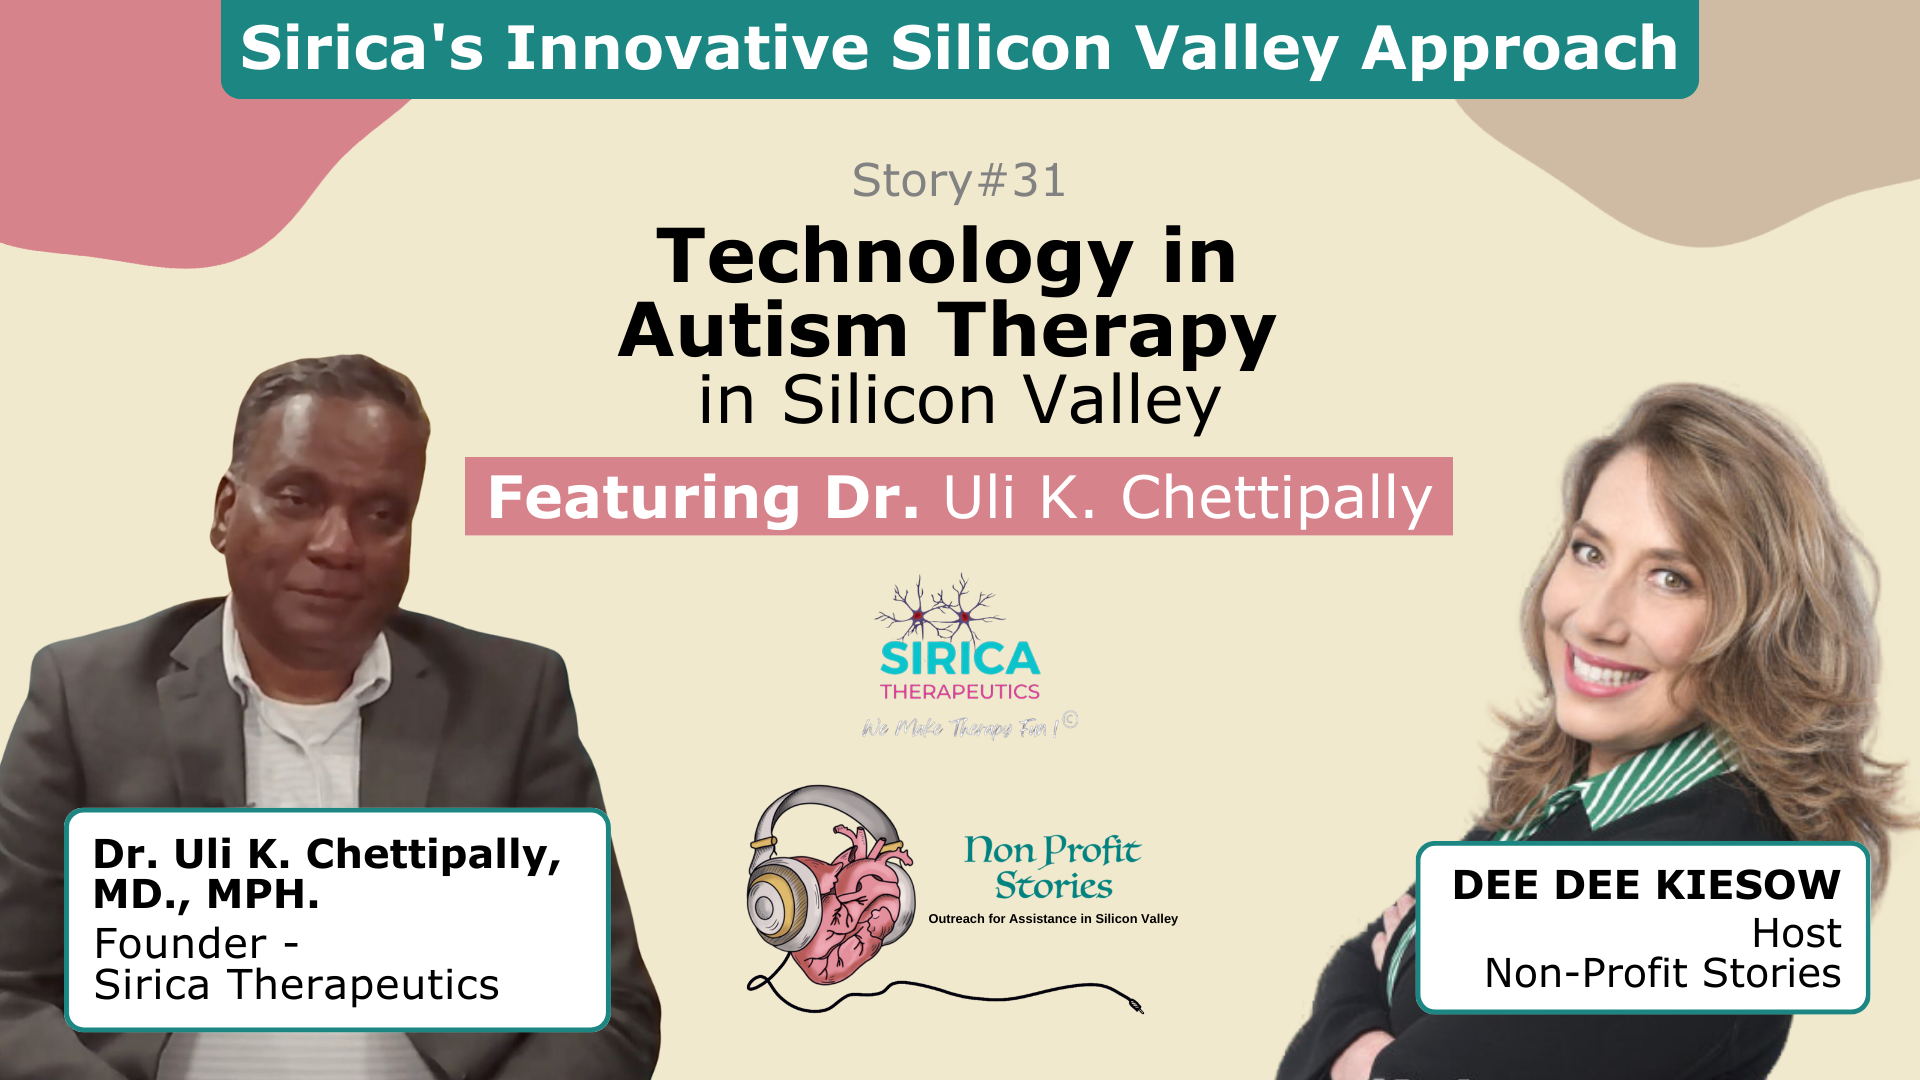 Technology in Autism Therapy: Sirica's Innovative Silicon Valley Approach